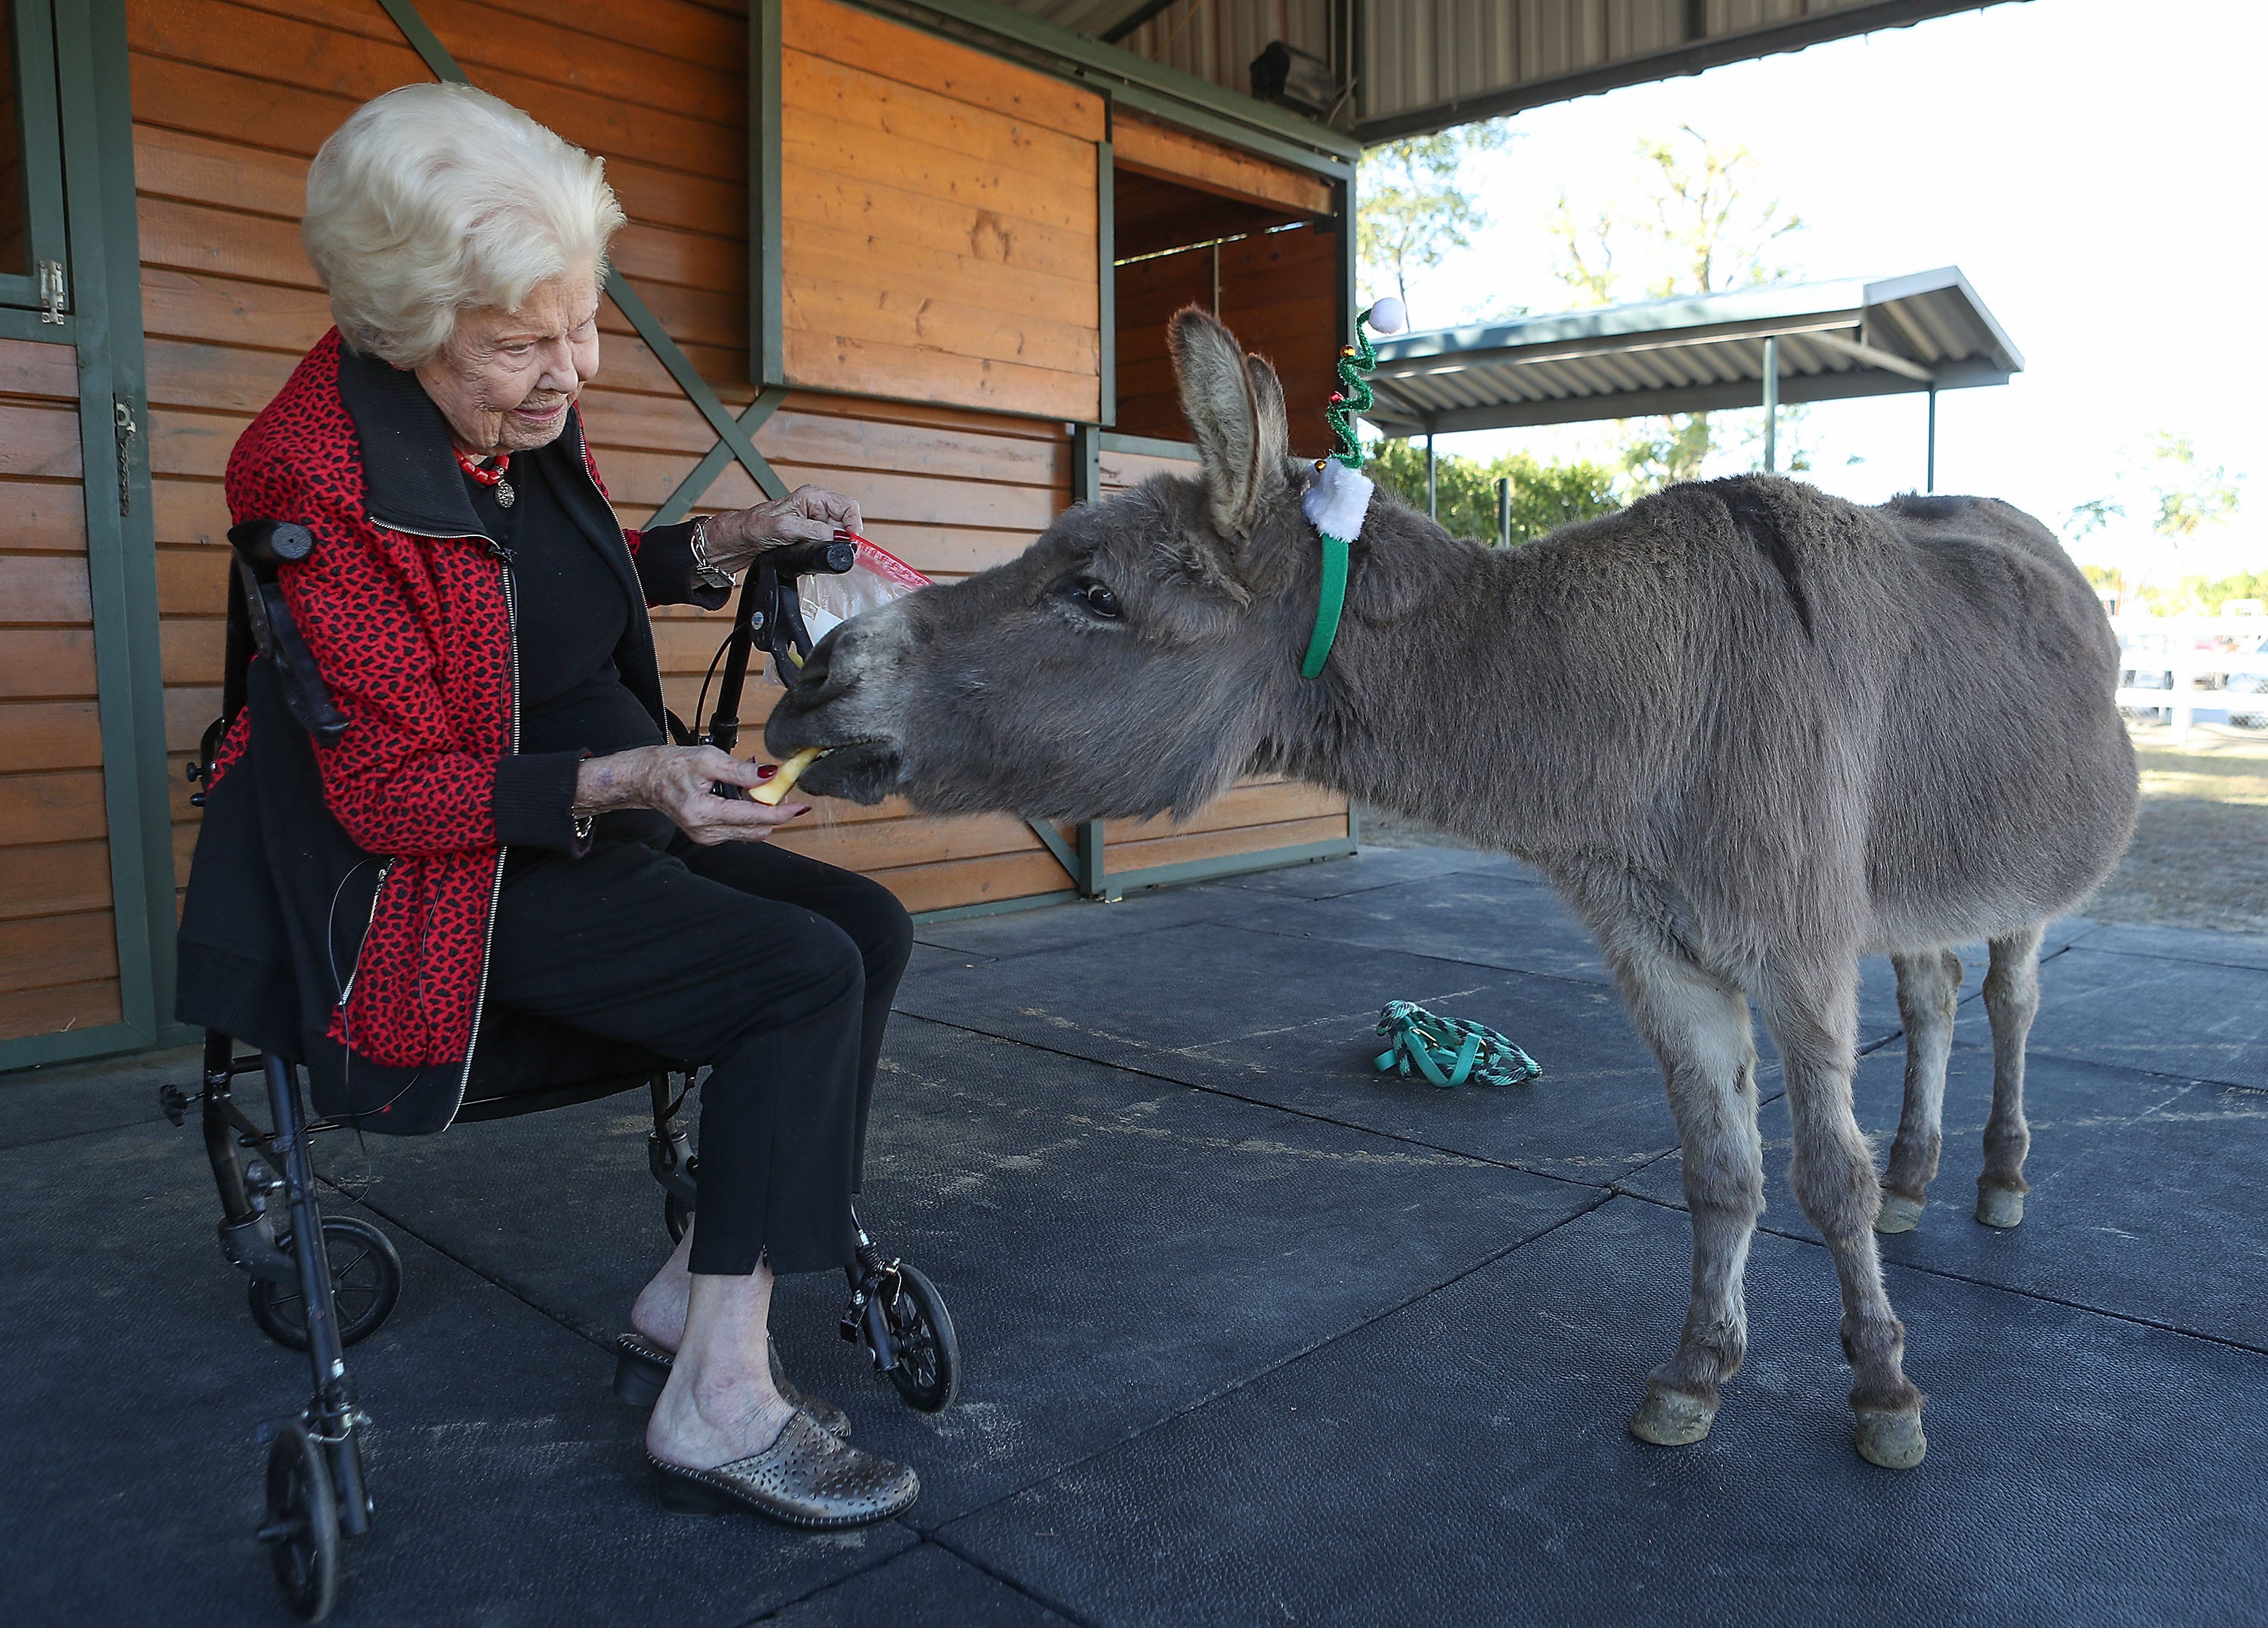 At 101 years old, Indian Wells woman enjoys 'slow lane' with her miniature  donkey